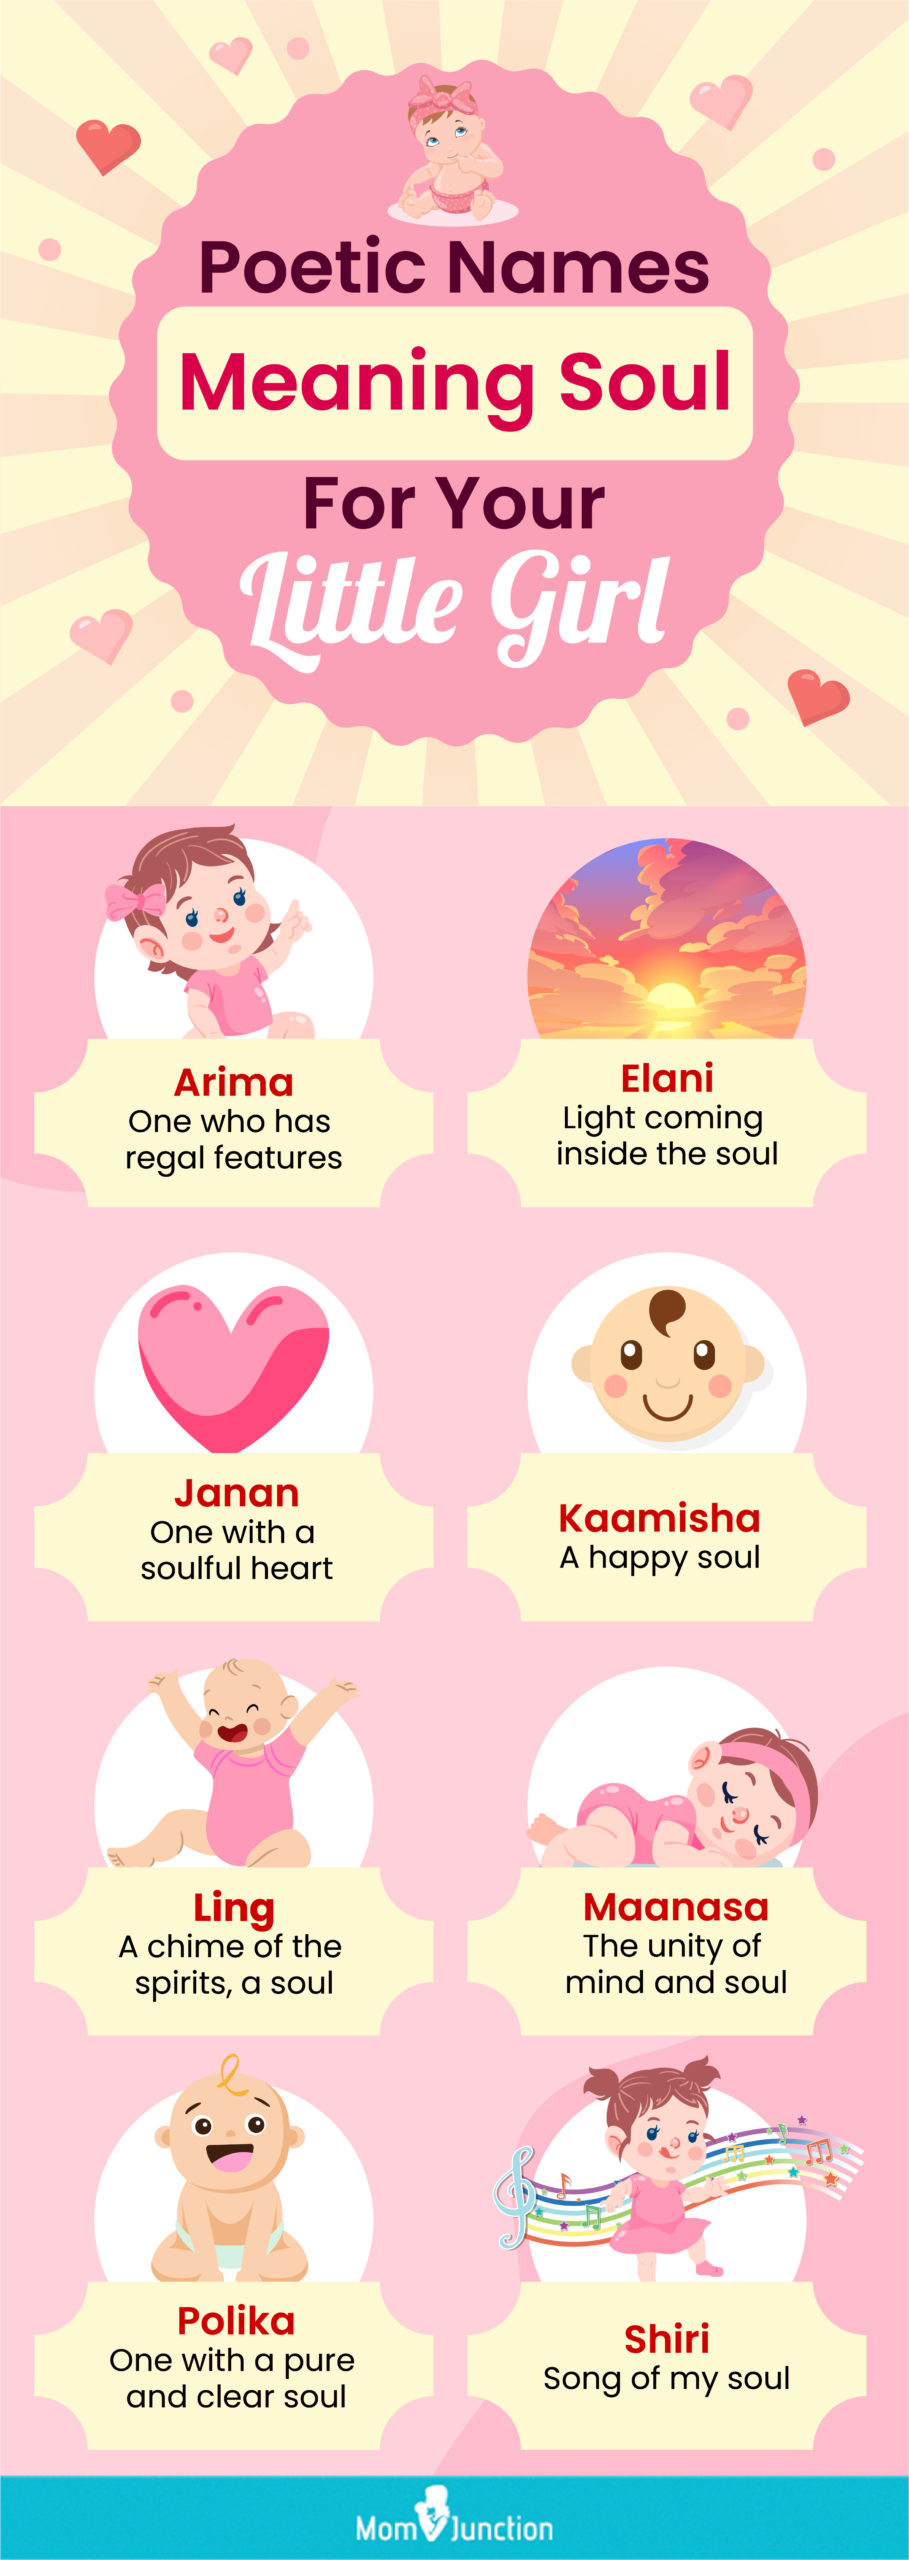 poetic names meaning soul for your little girl (infographic)